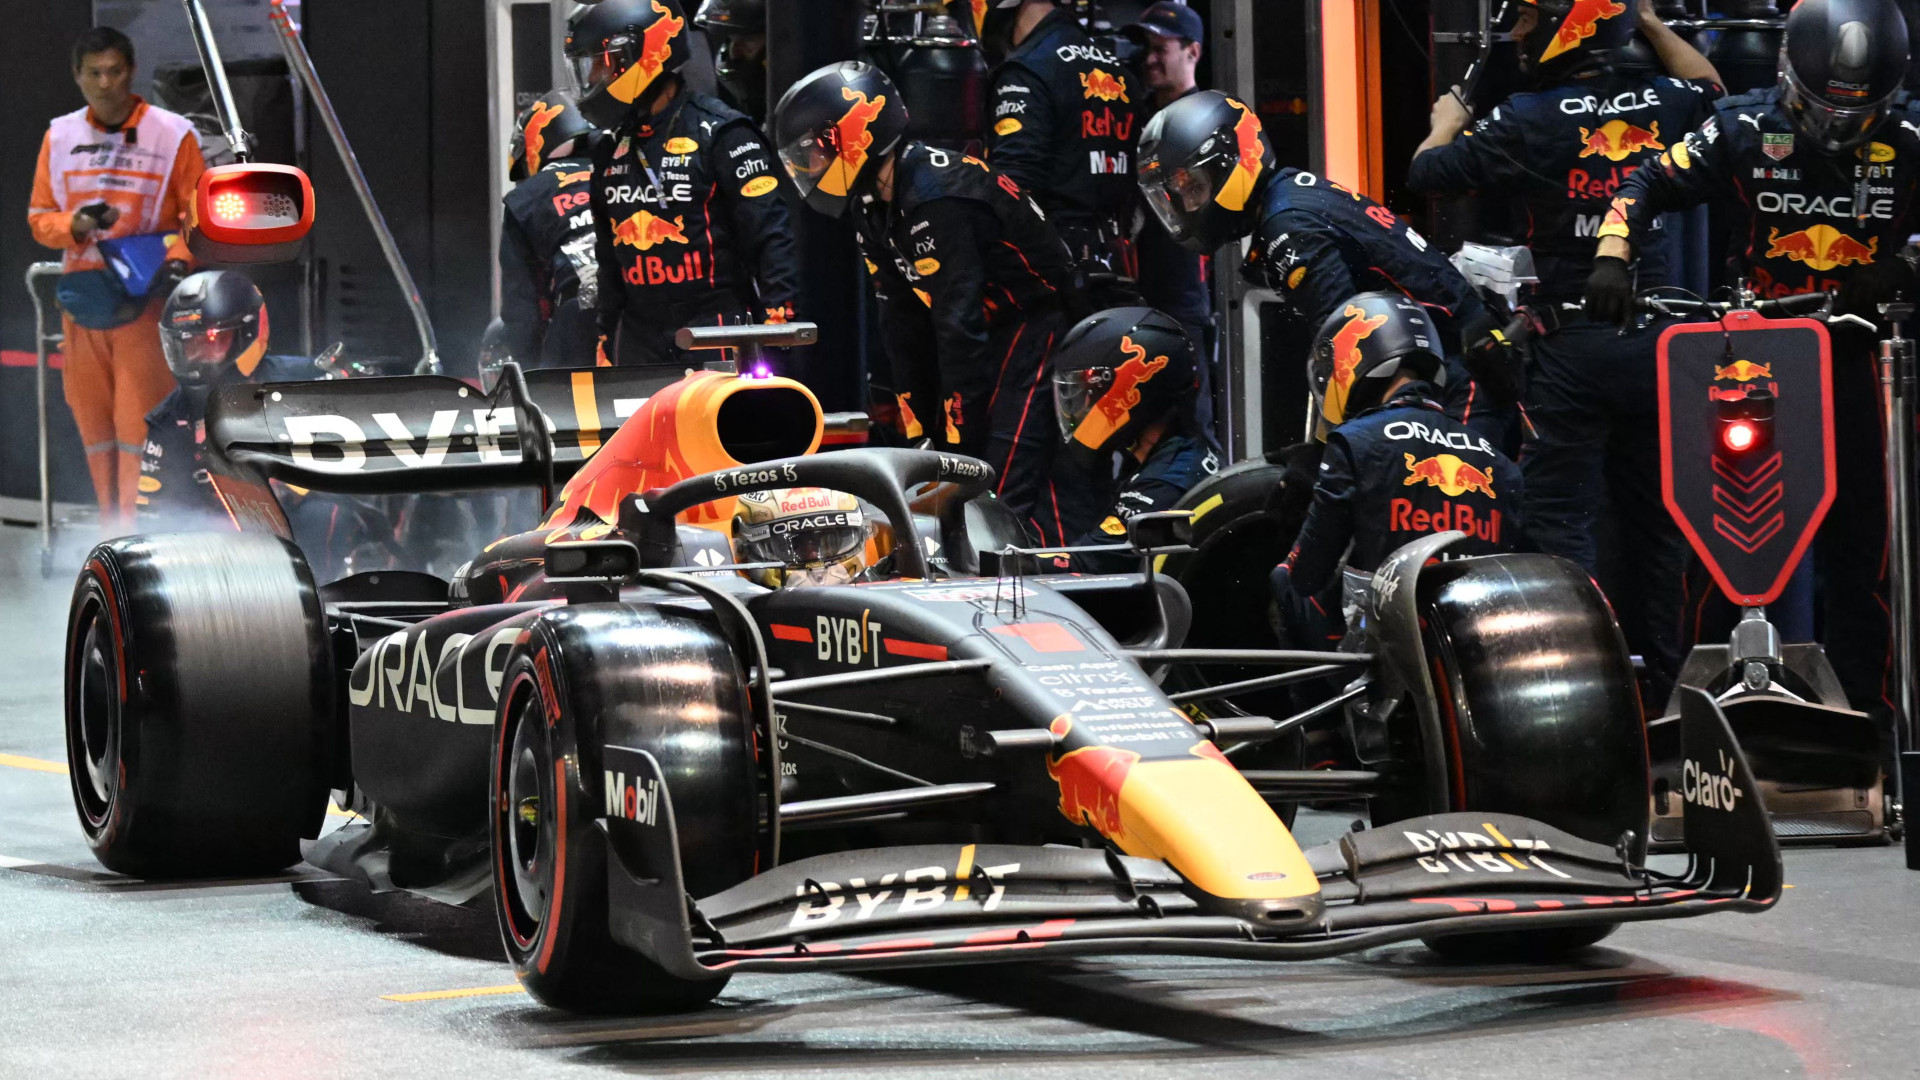 Max Verstappen pits in his Red Bull car